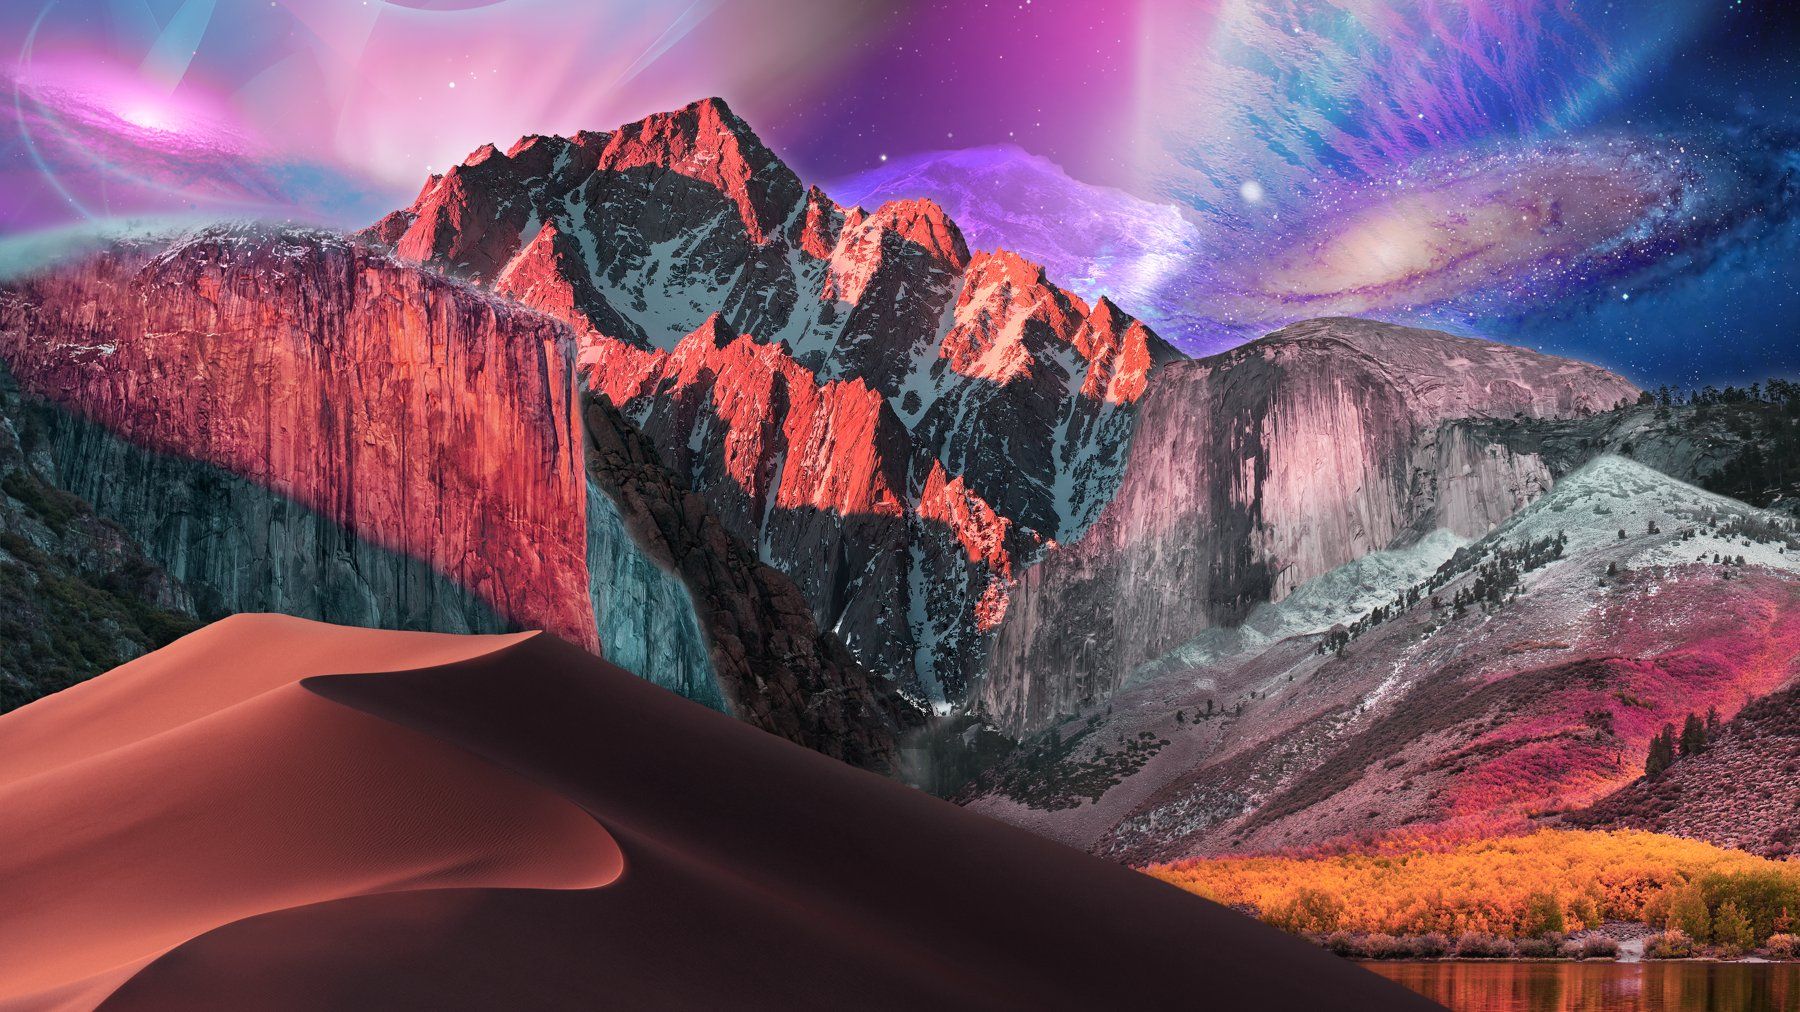 Every Mac wallpaper from Cheetah to Catalina, combined into a single image